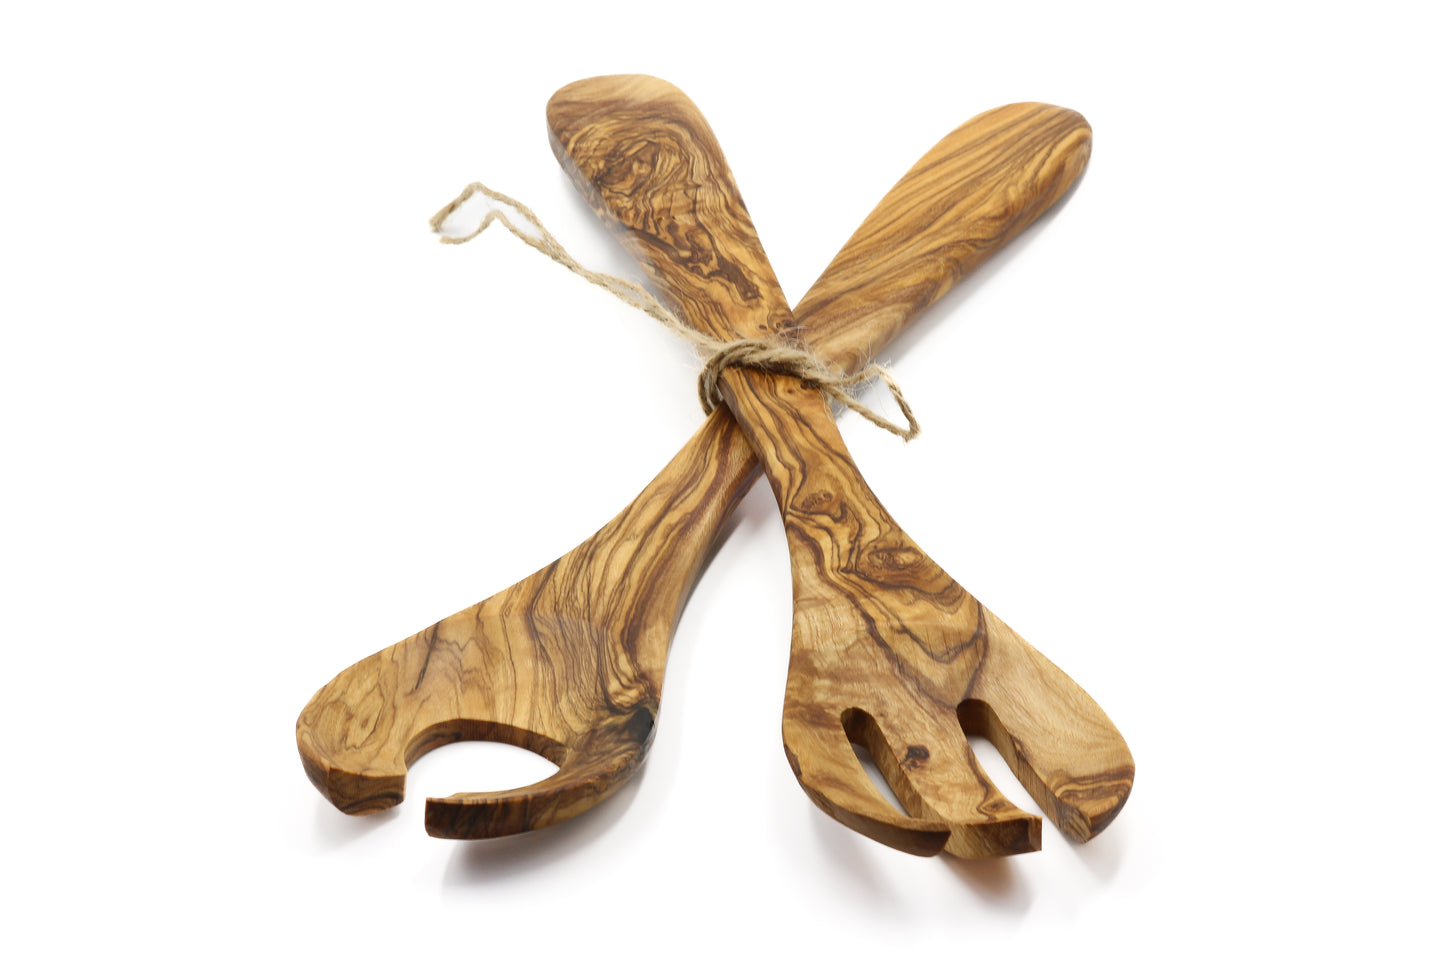 Sustainable and natural: olive wood duo salad servers